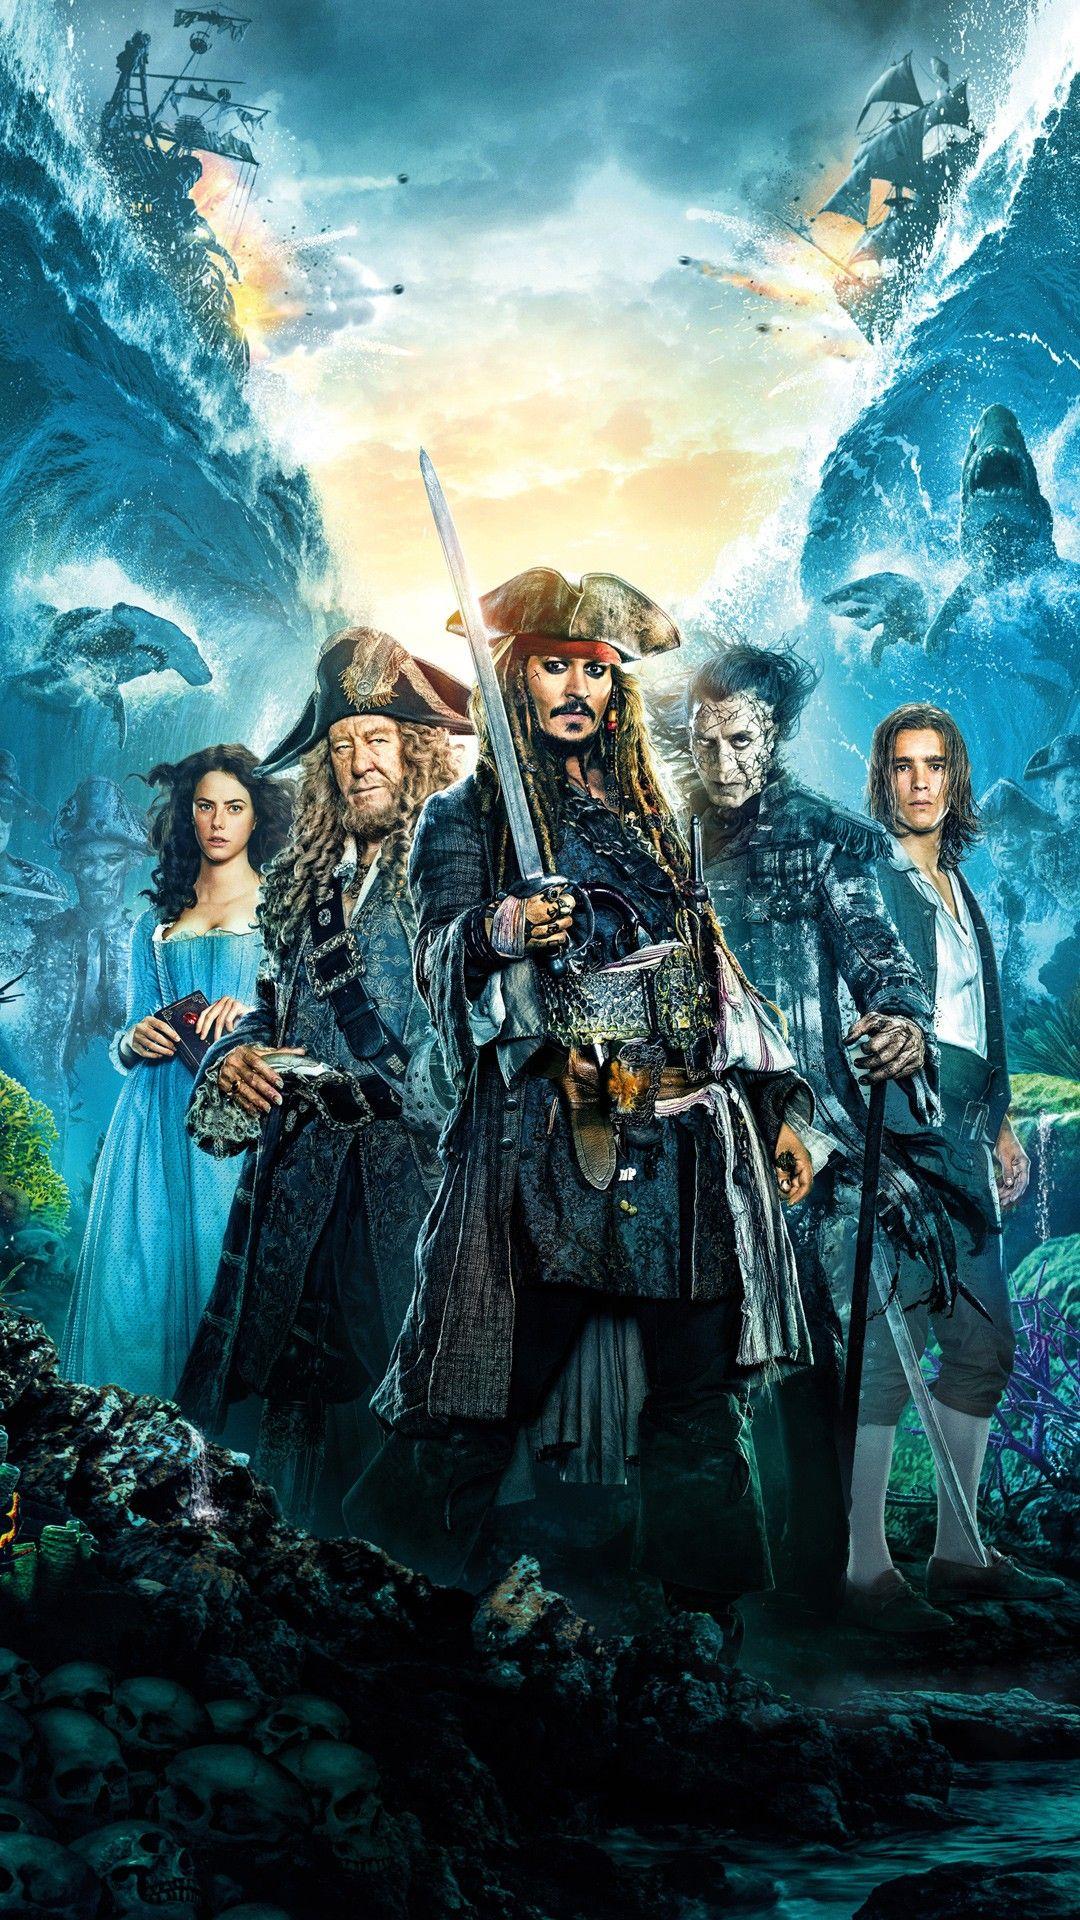 Pirates of the Caribbean iPhone Wallpaper Free Pirates of the Caribbean iPhone Background